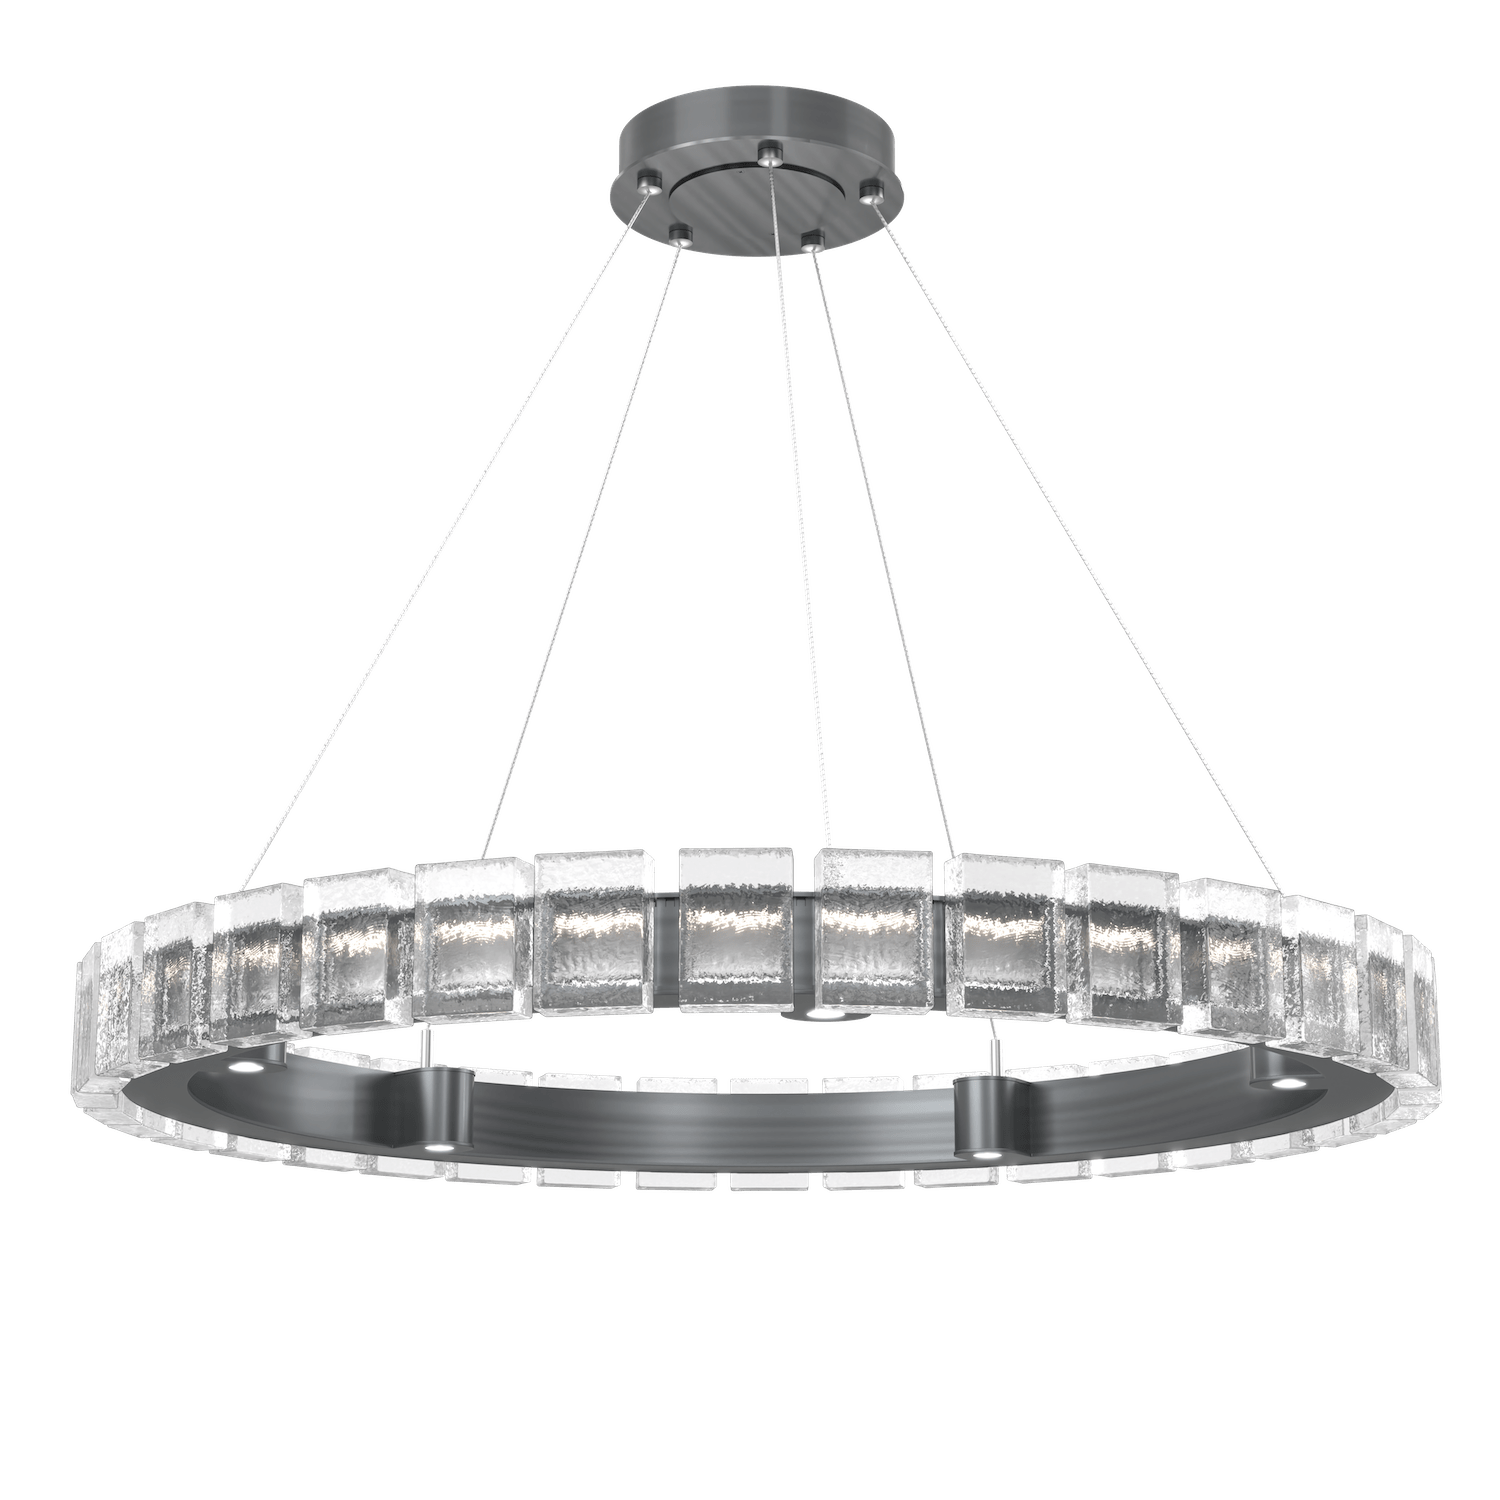 CHB0087-38-GM-TP-Hammerton-Studio-Tessera-38-inch-ring-chandelier-with-gunmetal-finish-and-clear-pave-cast-glass-shade-and-LED-lamping